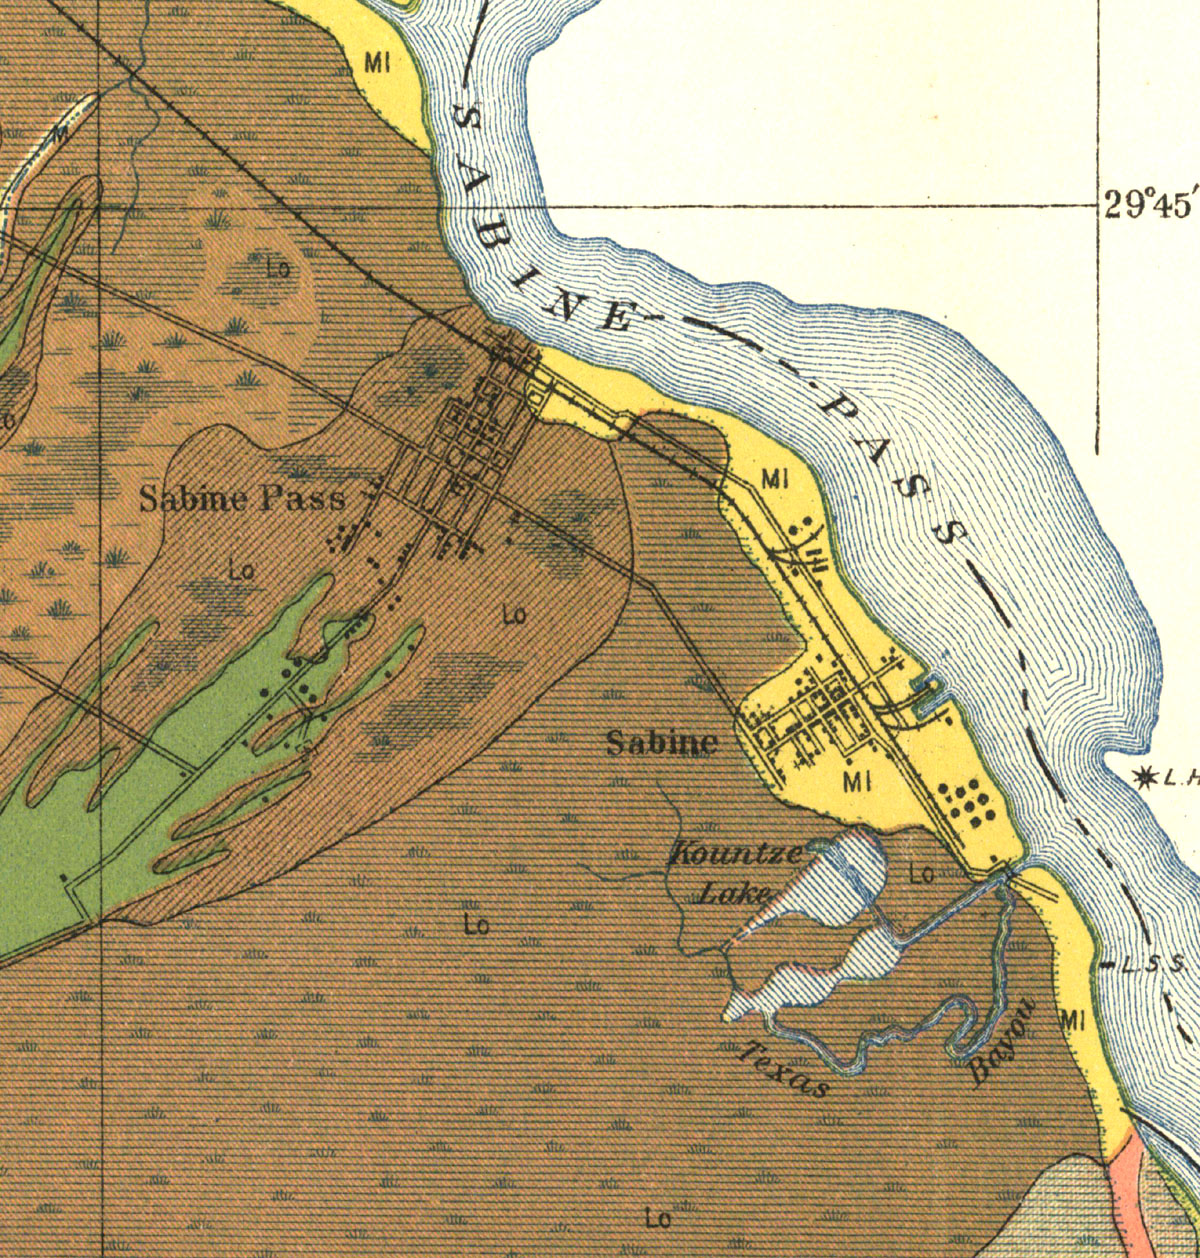 Sabine Pass, Texas. Map showing port and terminal tracks in 1913.